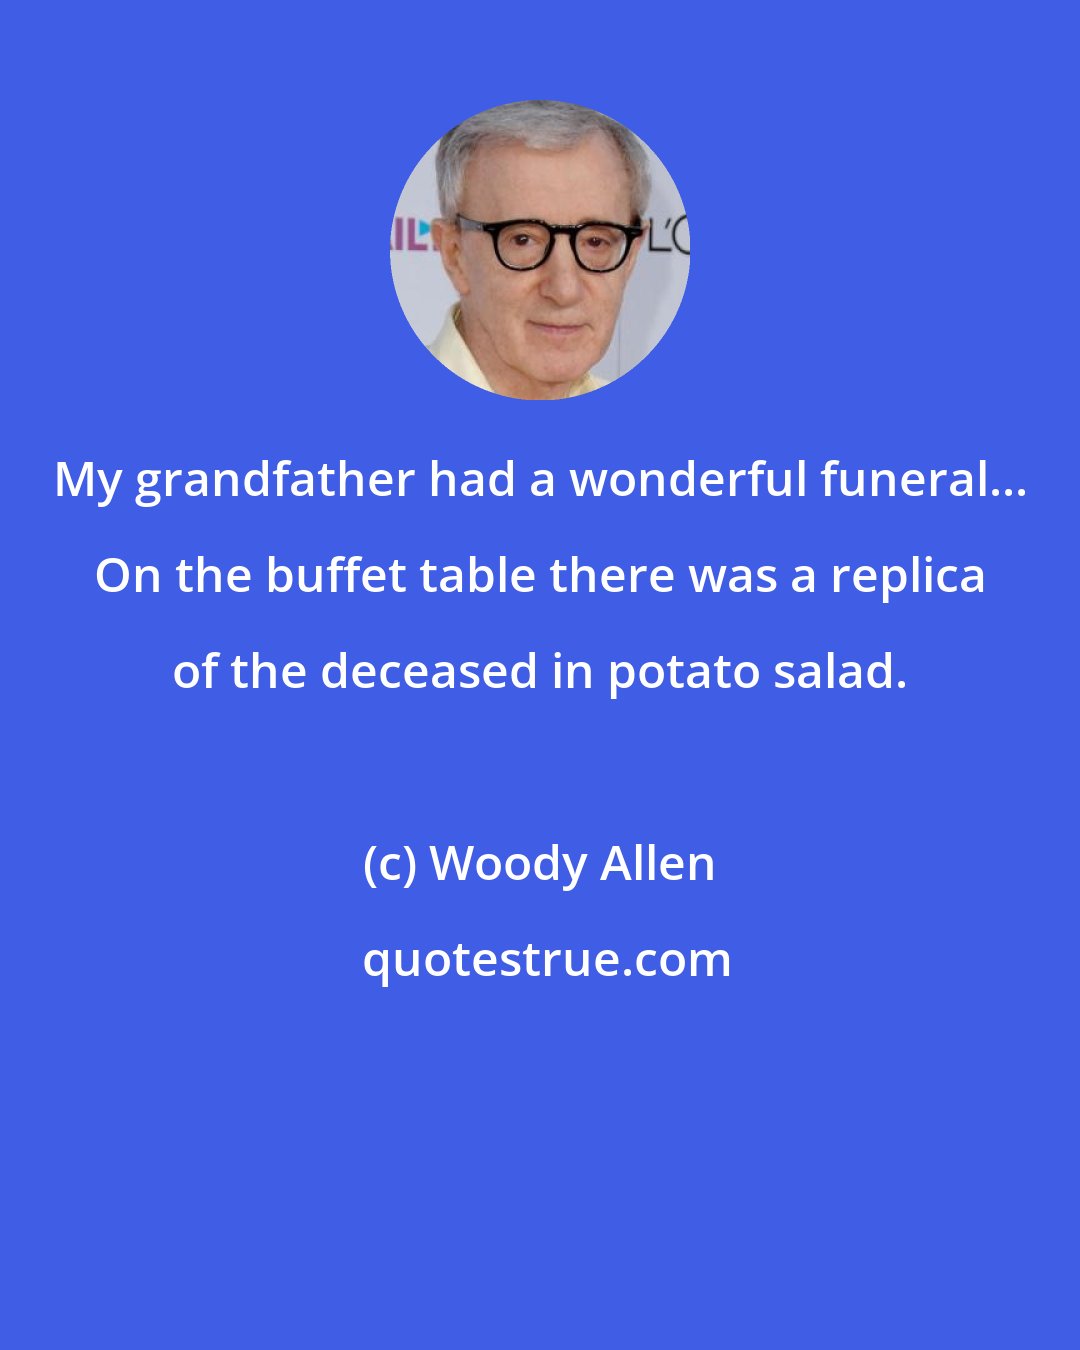 Woody Allen: My grandfather had a wonderful funeral... On the buffet table there was a replica of the deceased in potato salad.